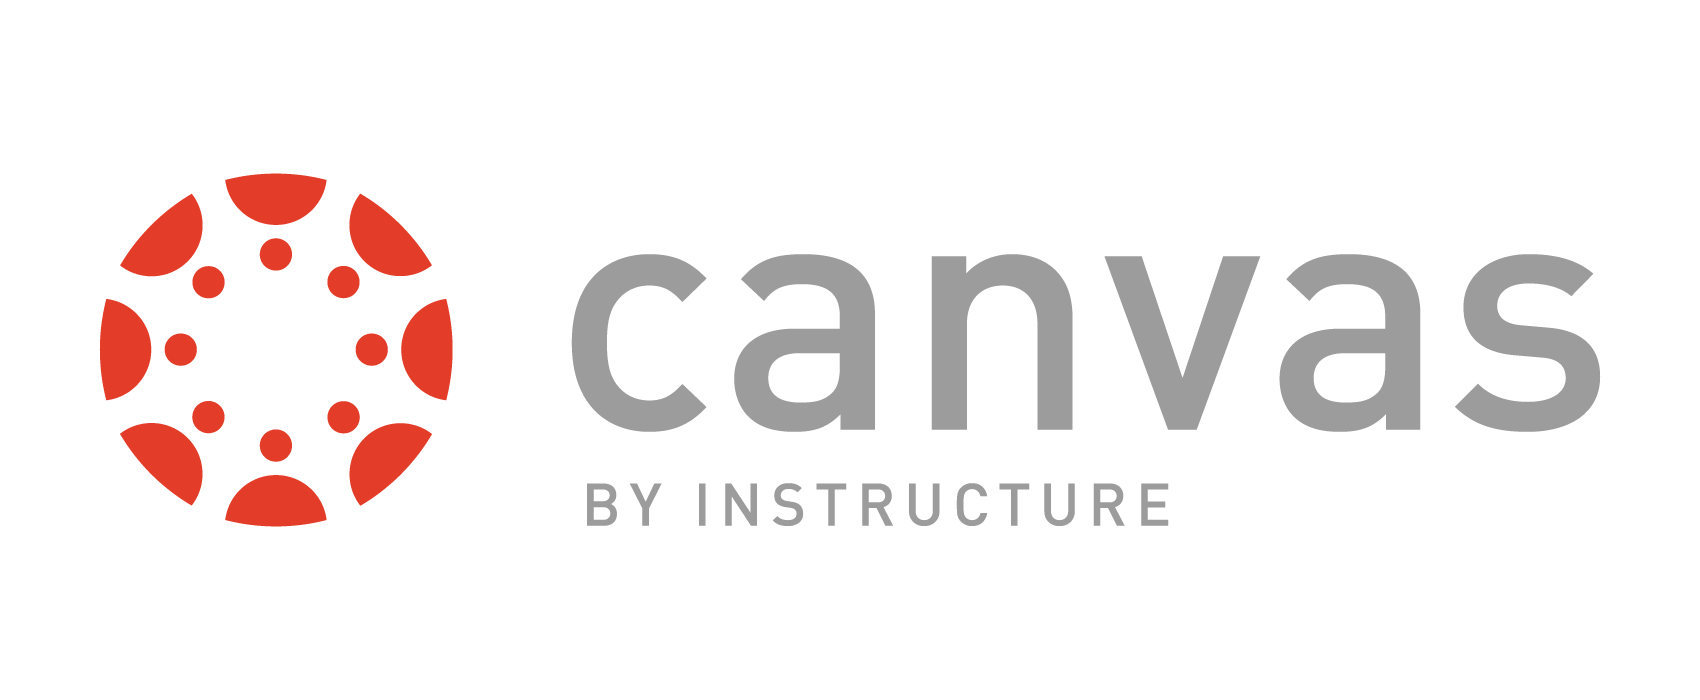 Canvas logo - there is a red circle with shapes on the inside and the word canvas in all lowercase next to it